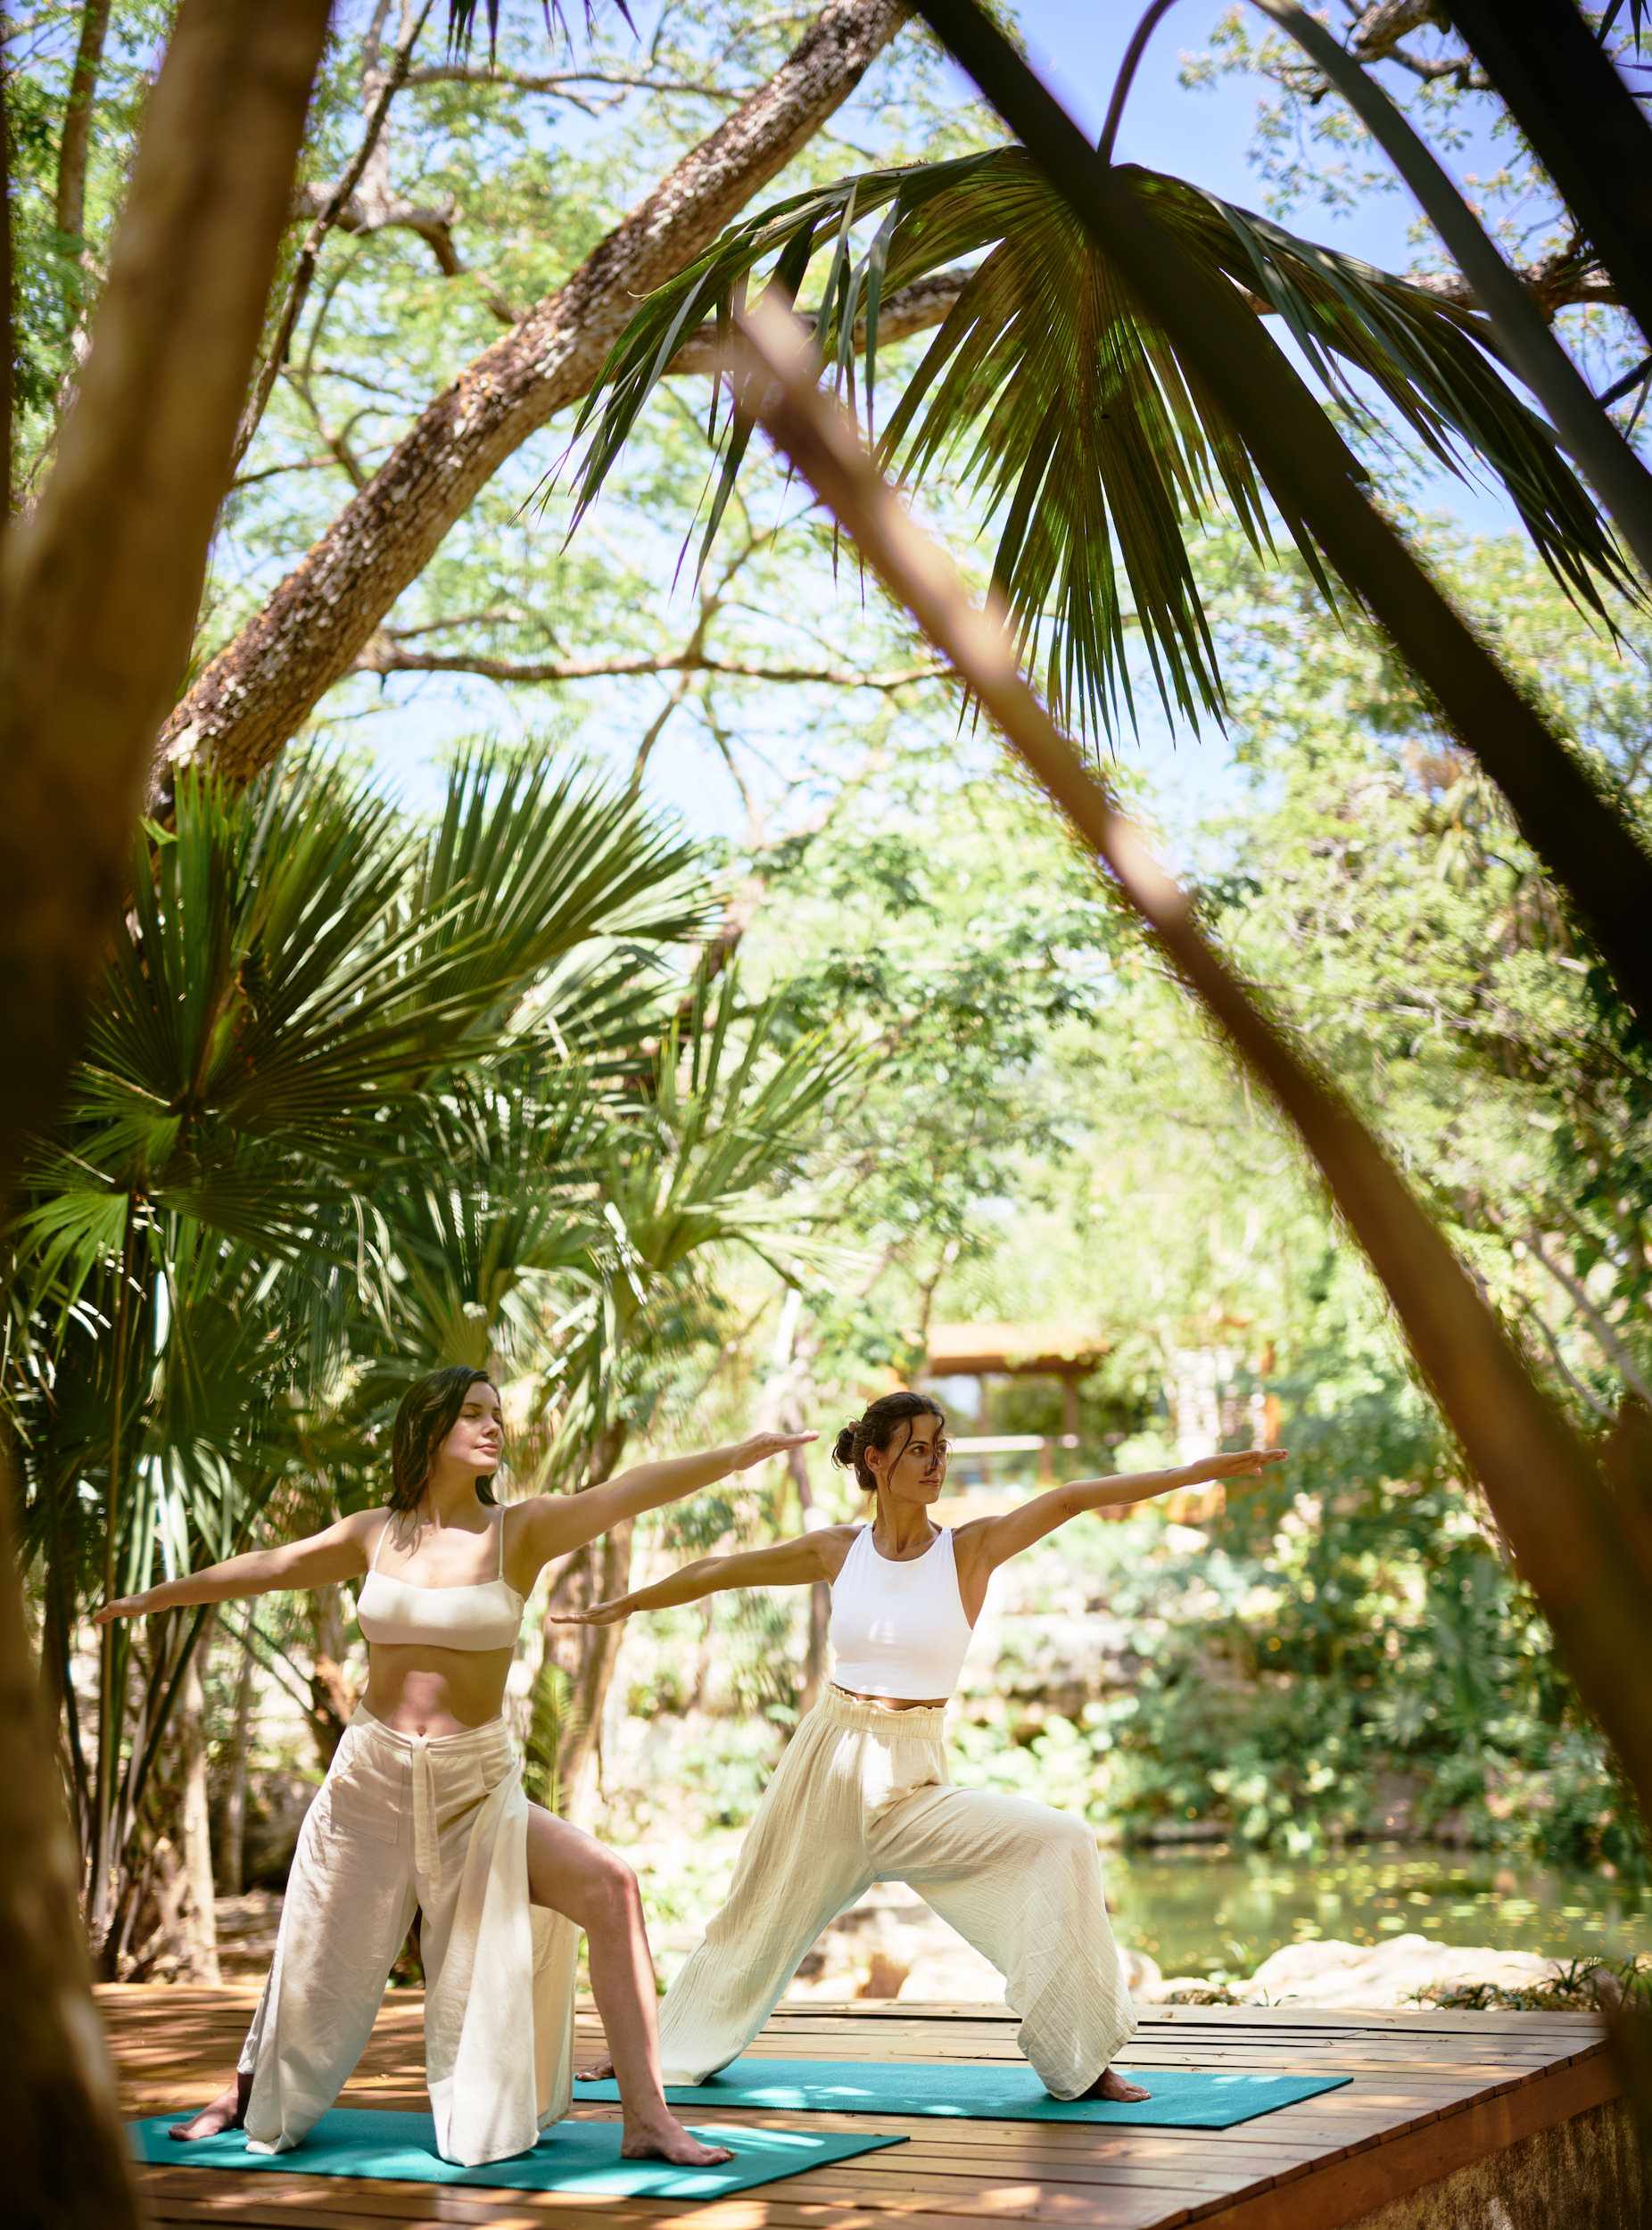 Two ladies doing yoga on a wooden surface with trees all around